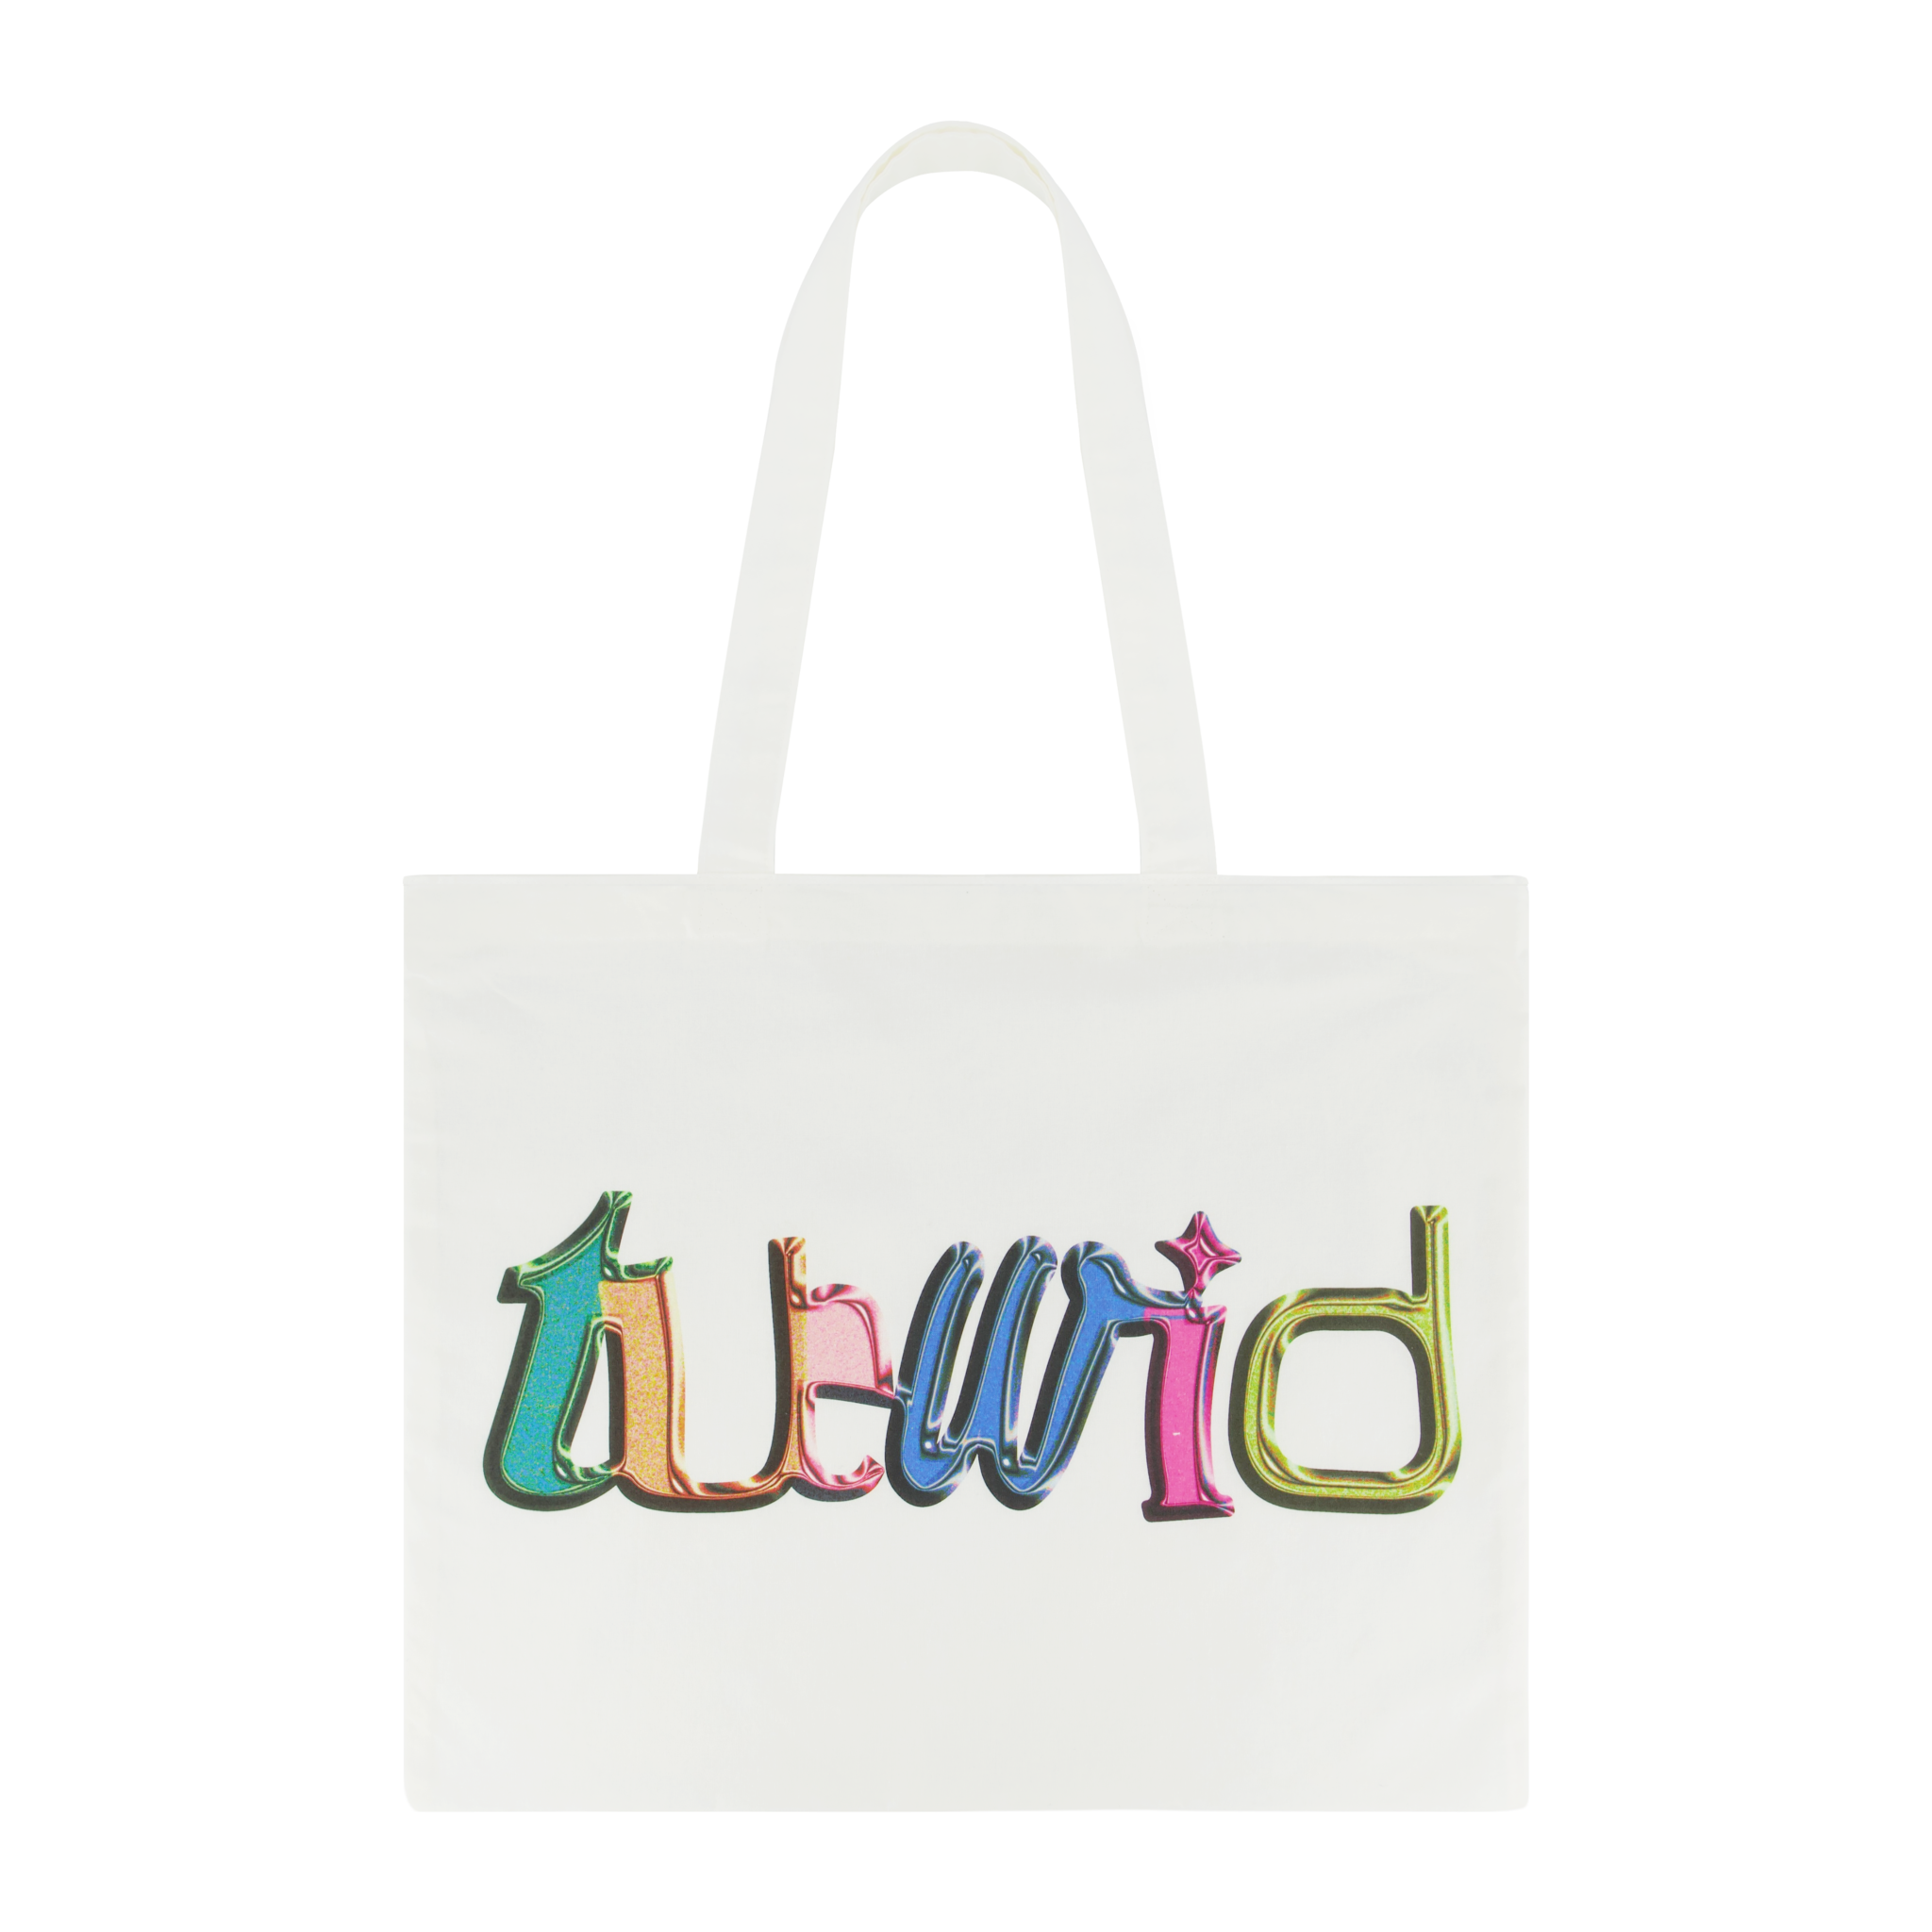 Tuewid day eco bag